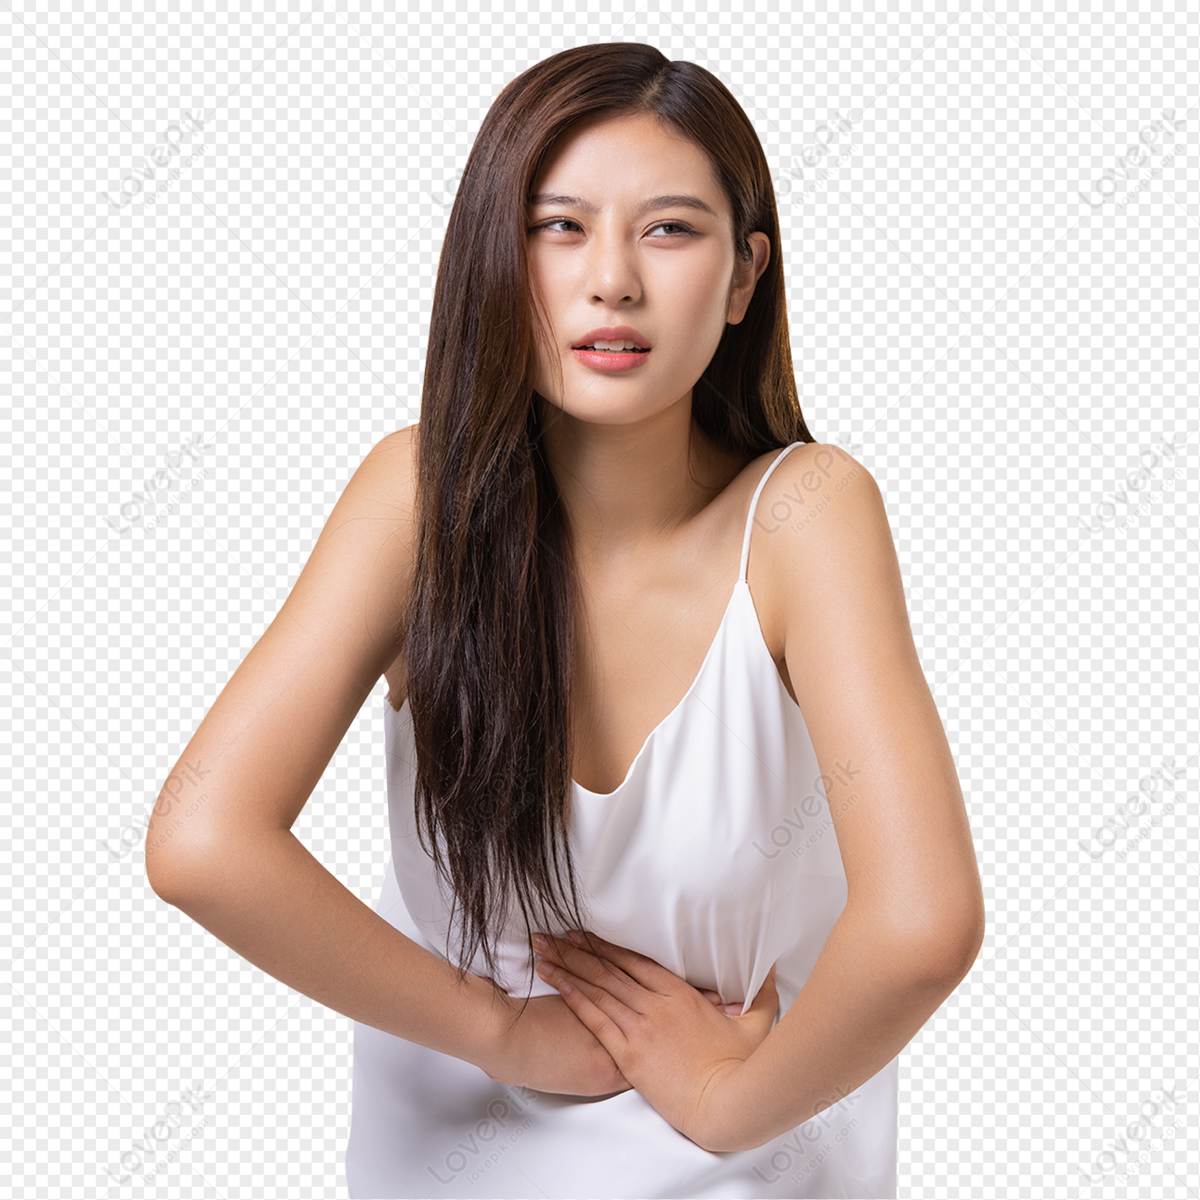 Female With Abdominal Pain Material Womens Sick PNG Transparent